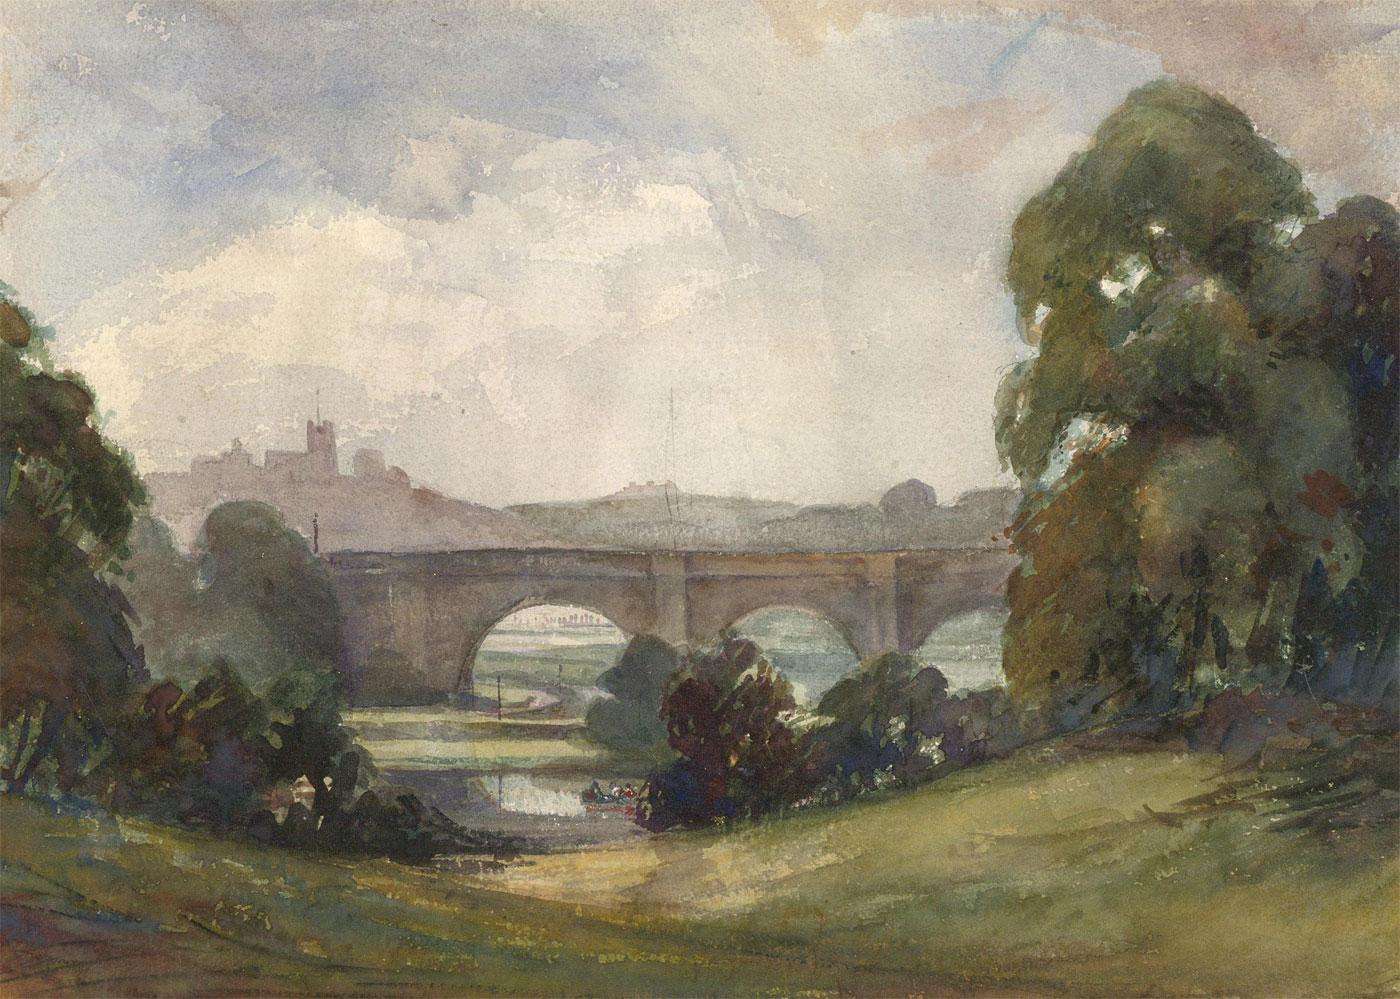 An extensive landscape view depicting a stone bridge spanning a river, with distant castle, Possibly Windsor. Unsigned. Presented in a wash-line mount.